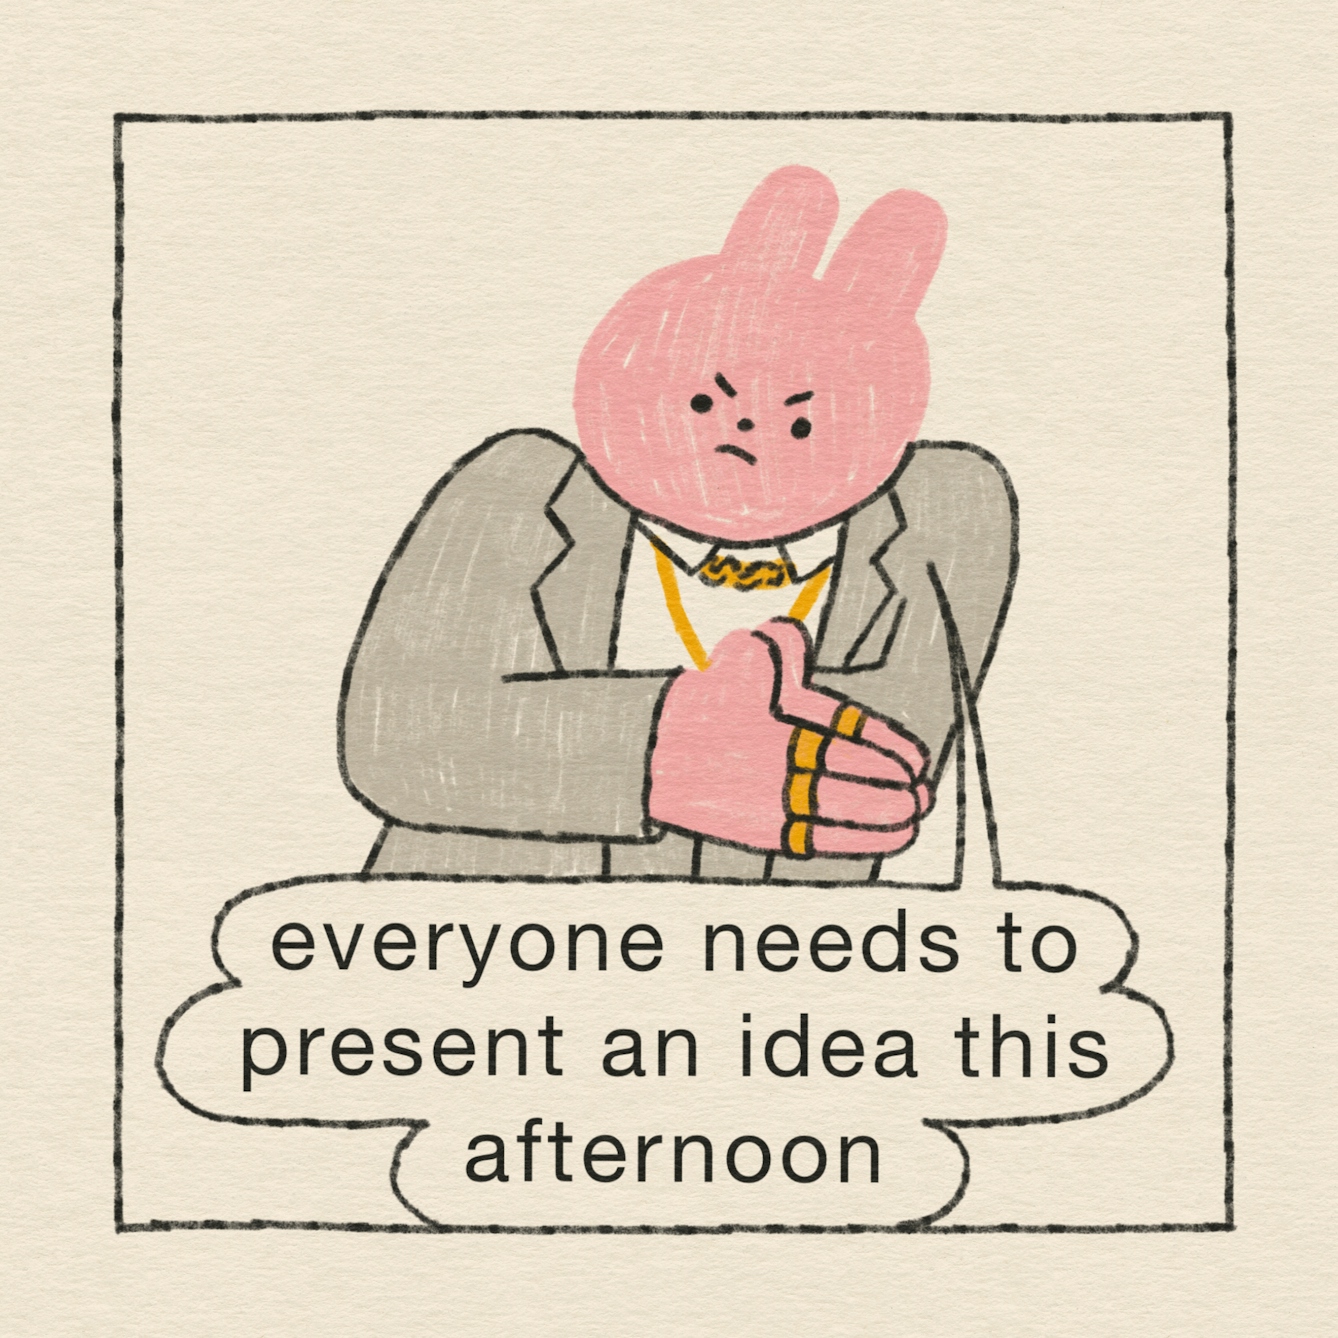 Panel 1 of 4: The CEO is a pink rabbit who wears a grey suit and lots of gold jewellery. Following their crisis meeting, he looks angry and says: “Everyone needs to present an idea this afternoon”. 